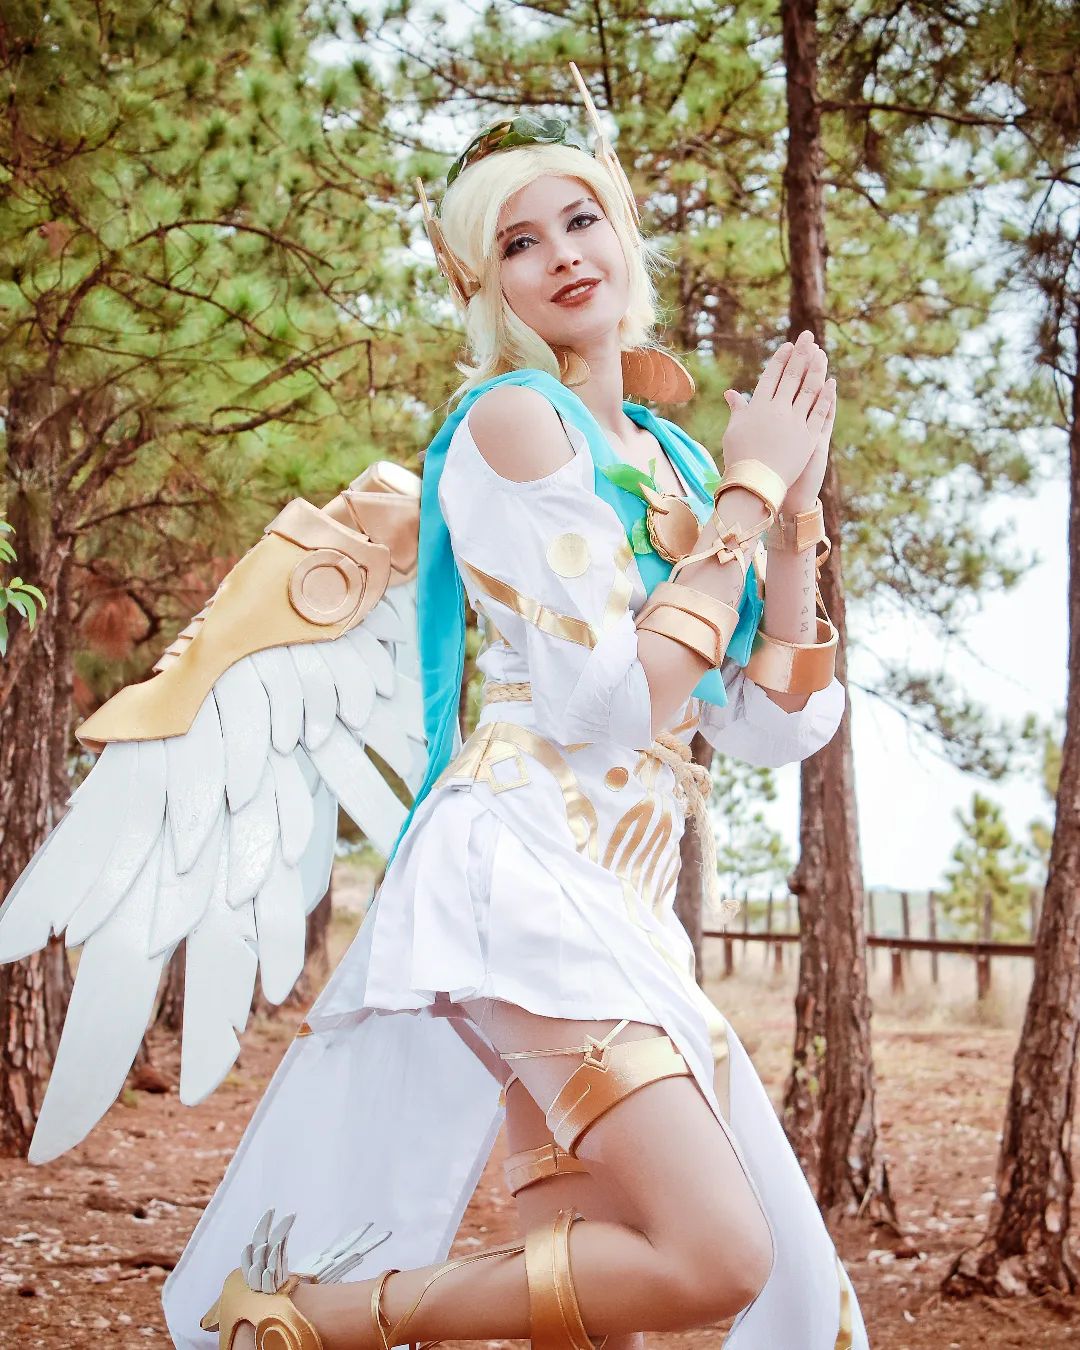 Mercy Victory Cosplay - Overwatch 2 - Rizzy 02